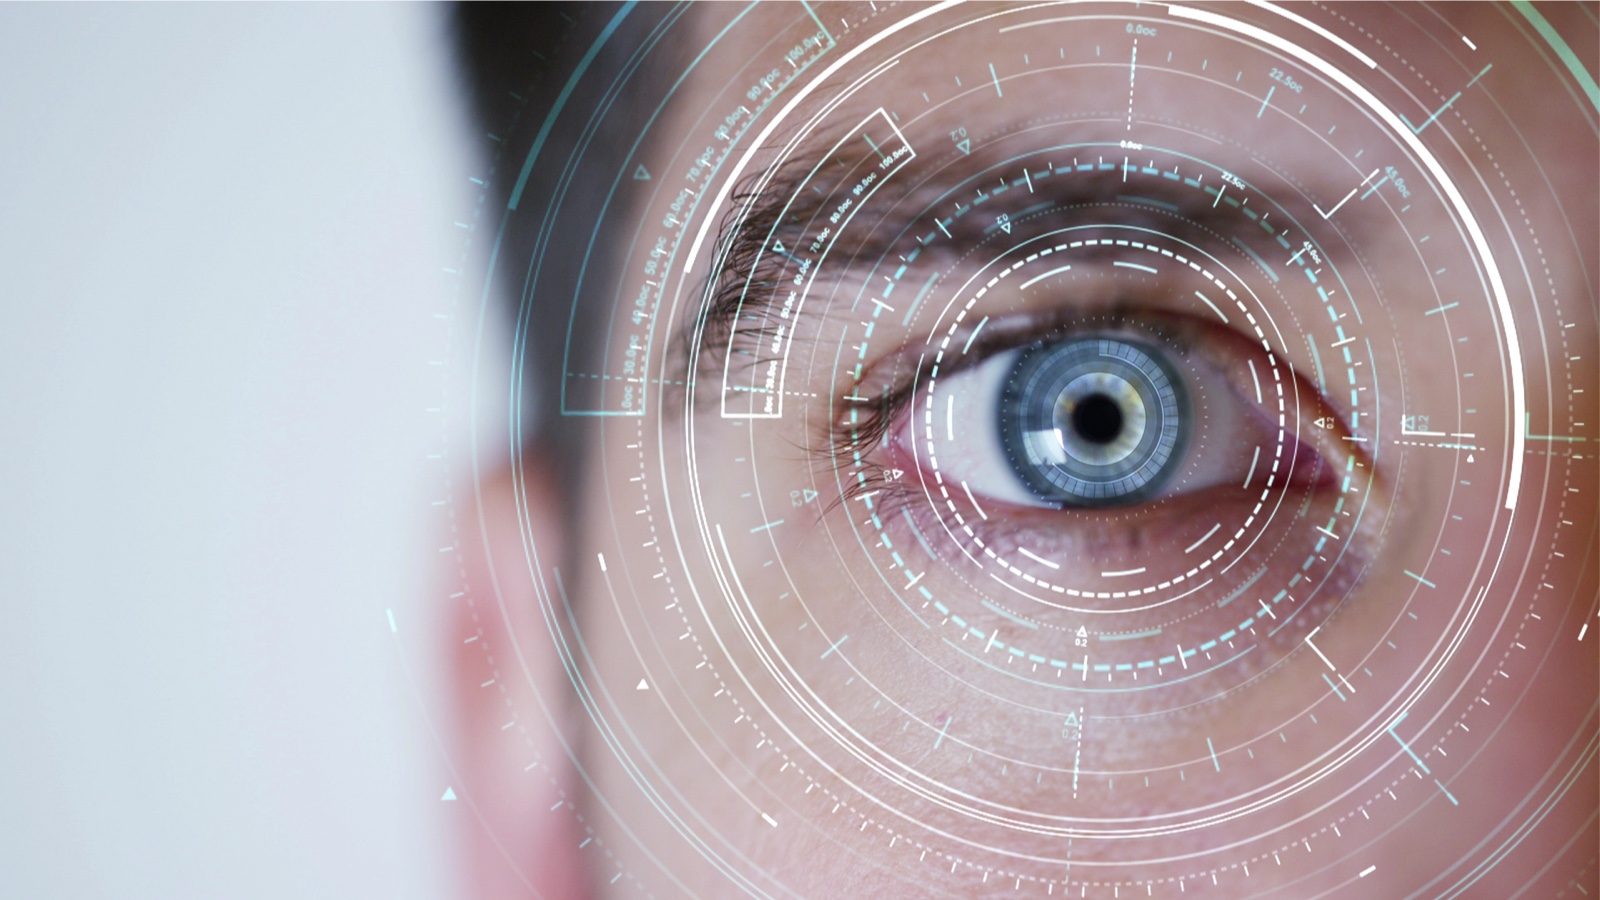 Higher Education: The Latest Focus of Biometrics Class Action Lawsuits